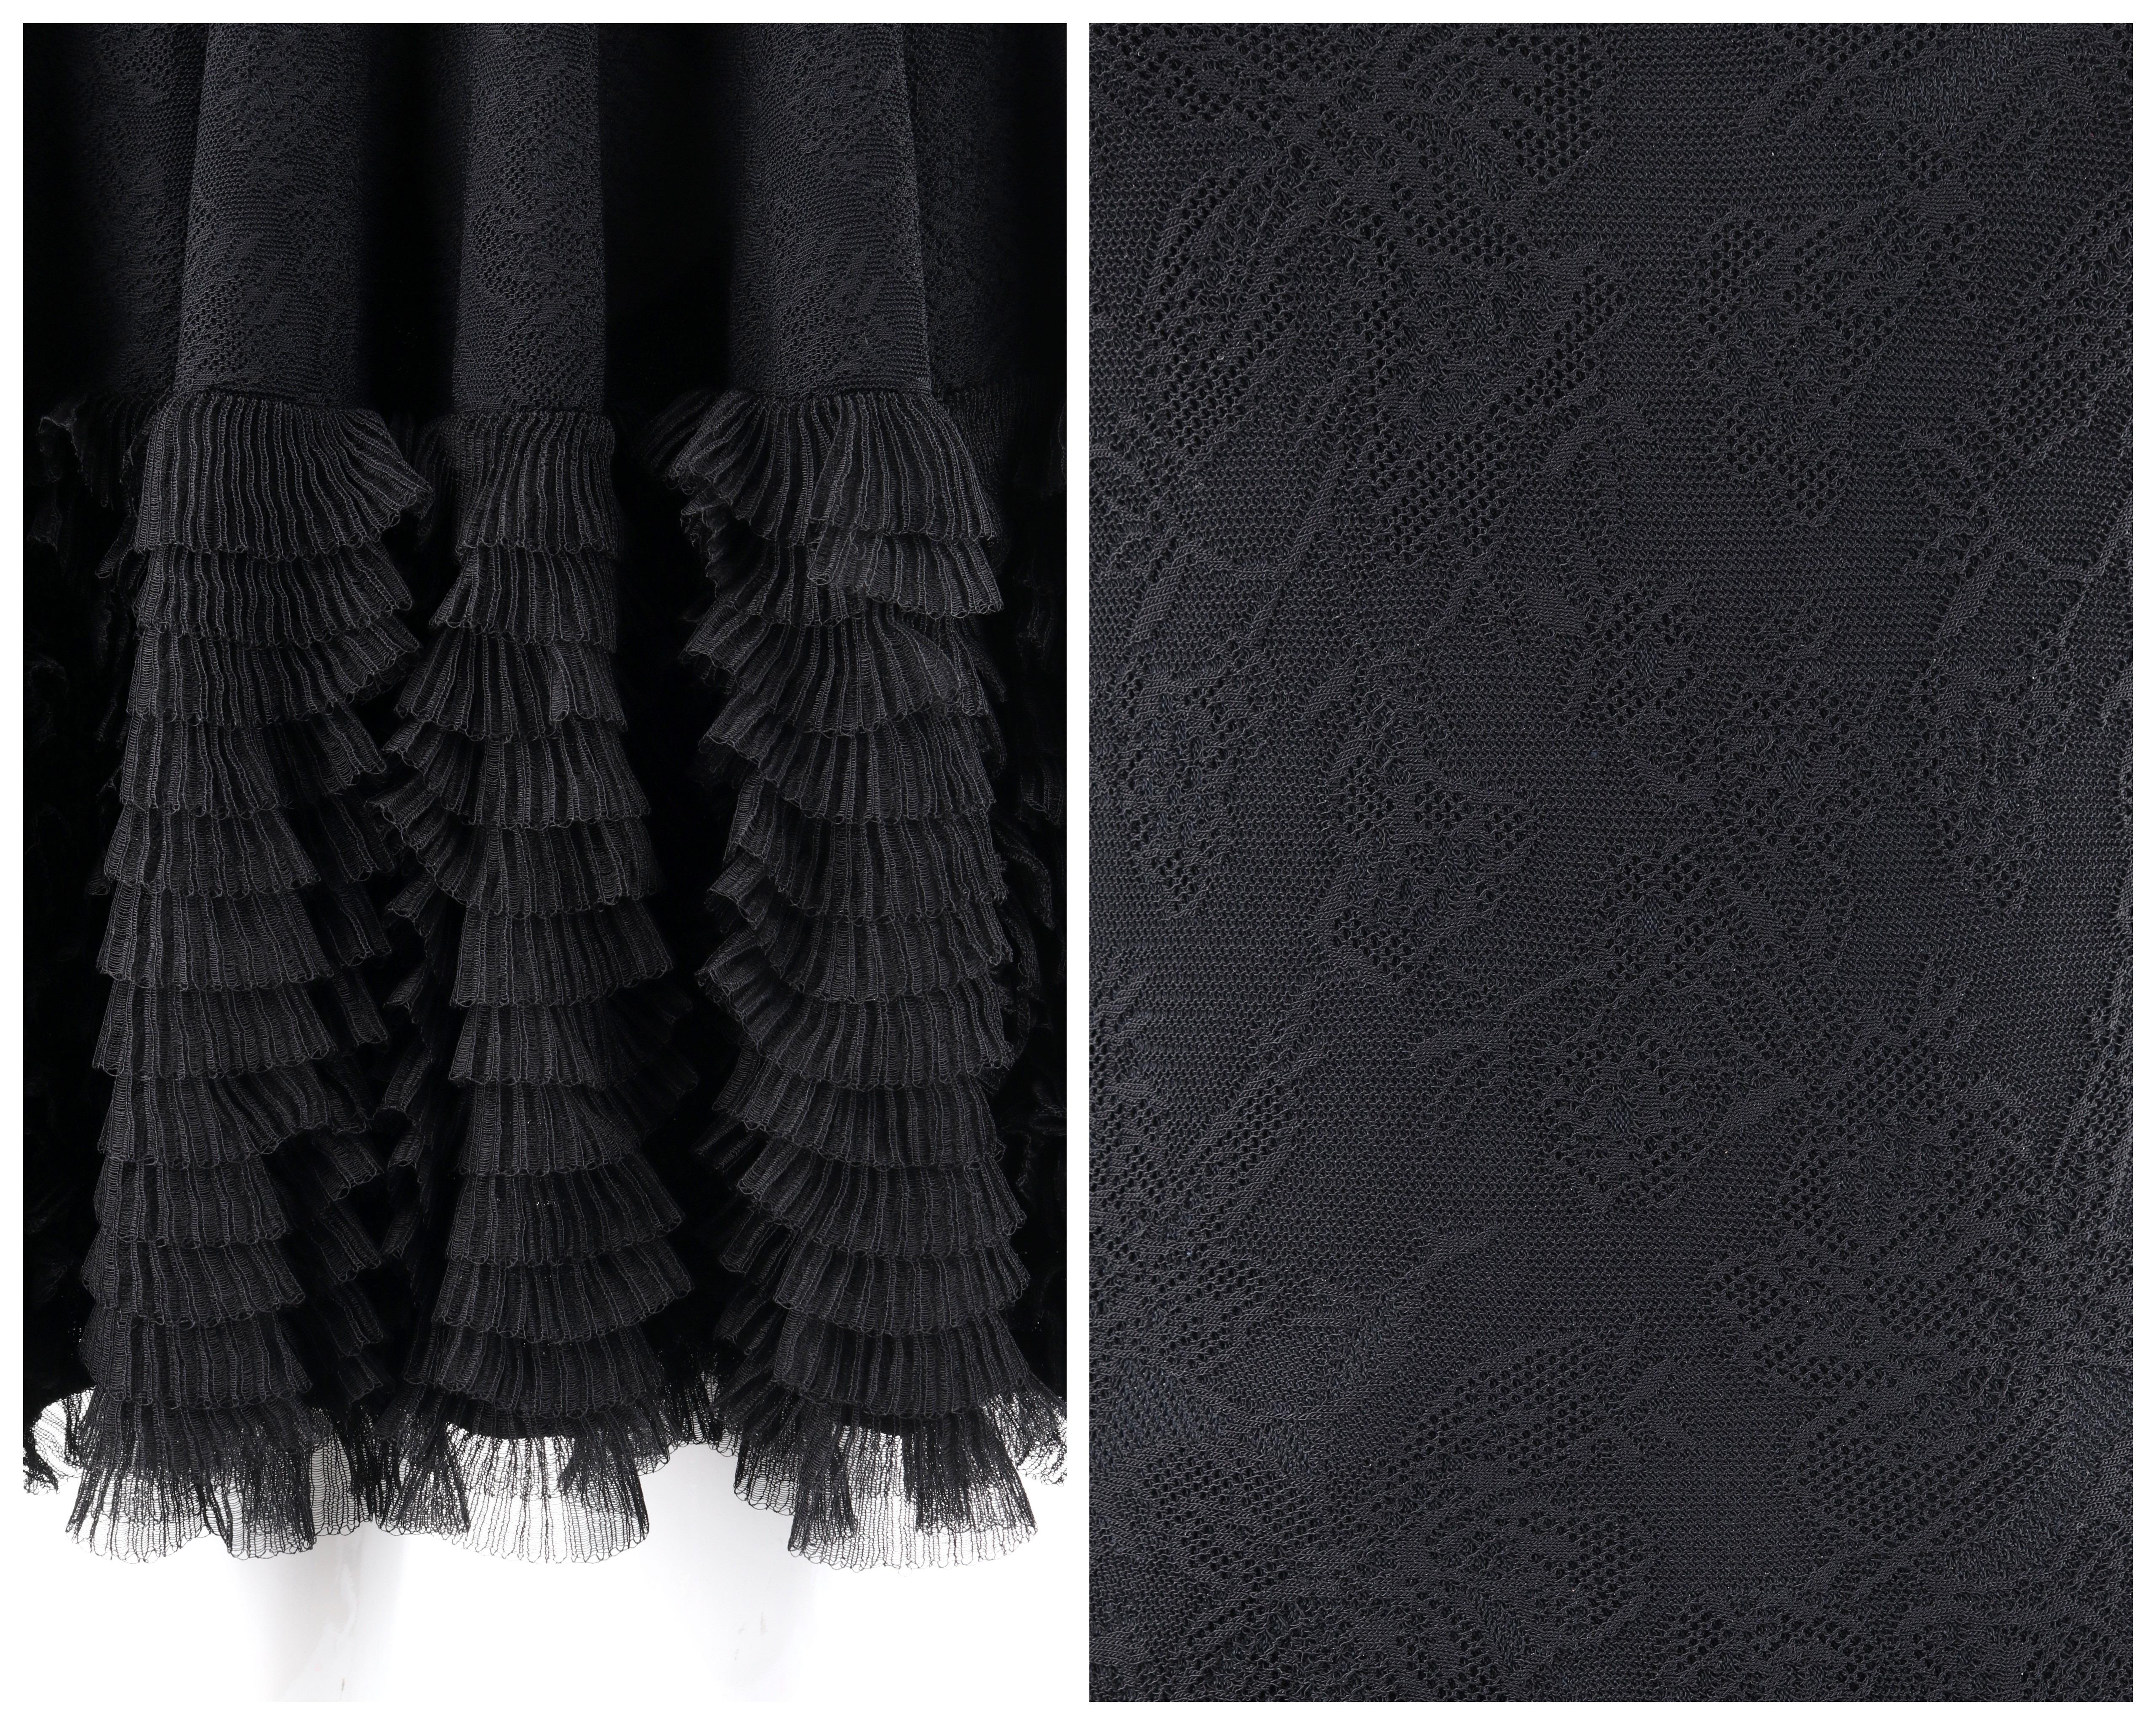 Black ALEXANDER McQUEEN A/W 2008 Floral Lace Knit Fit & Flare Ruffle Layer Skirt Dress For Sale